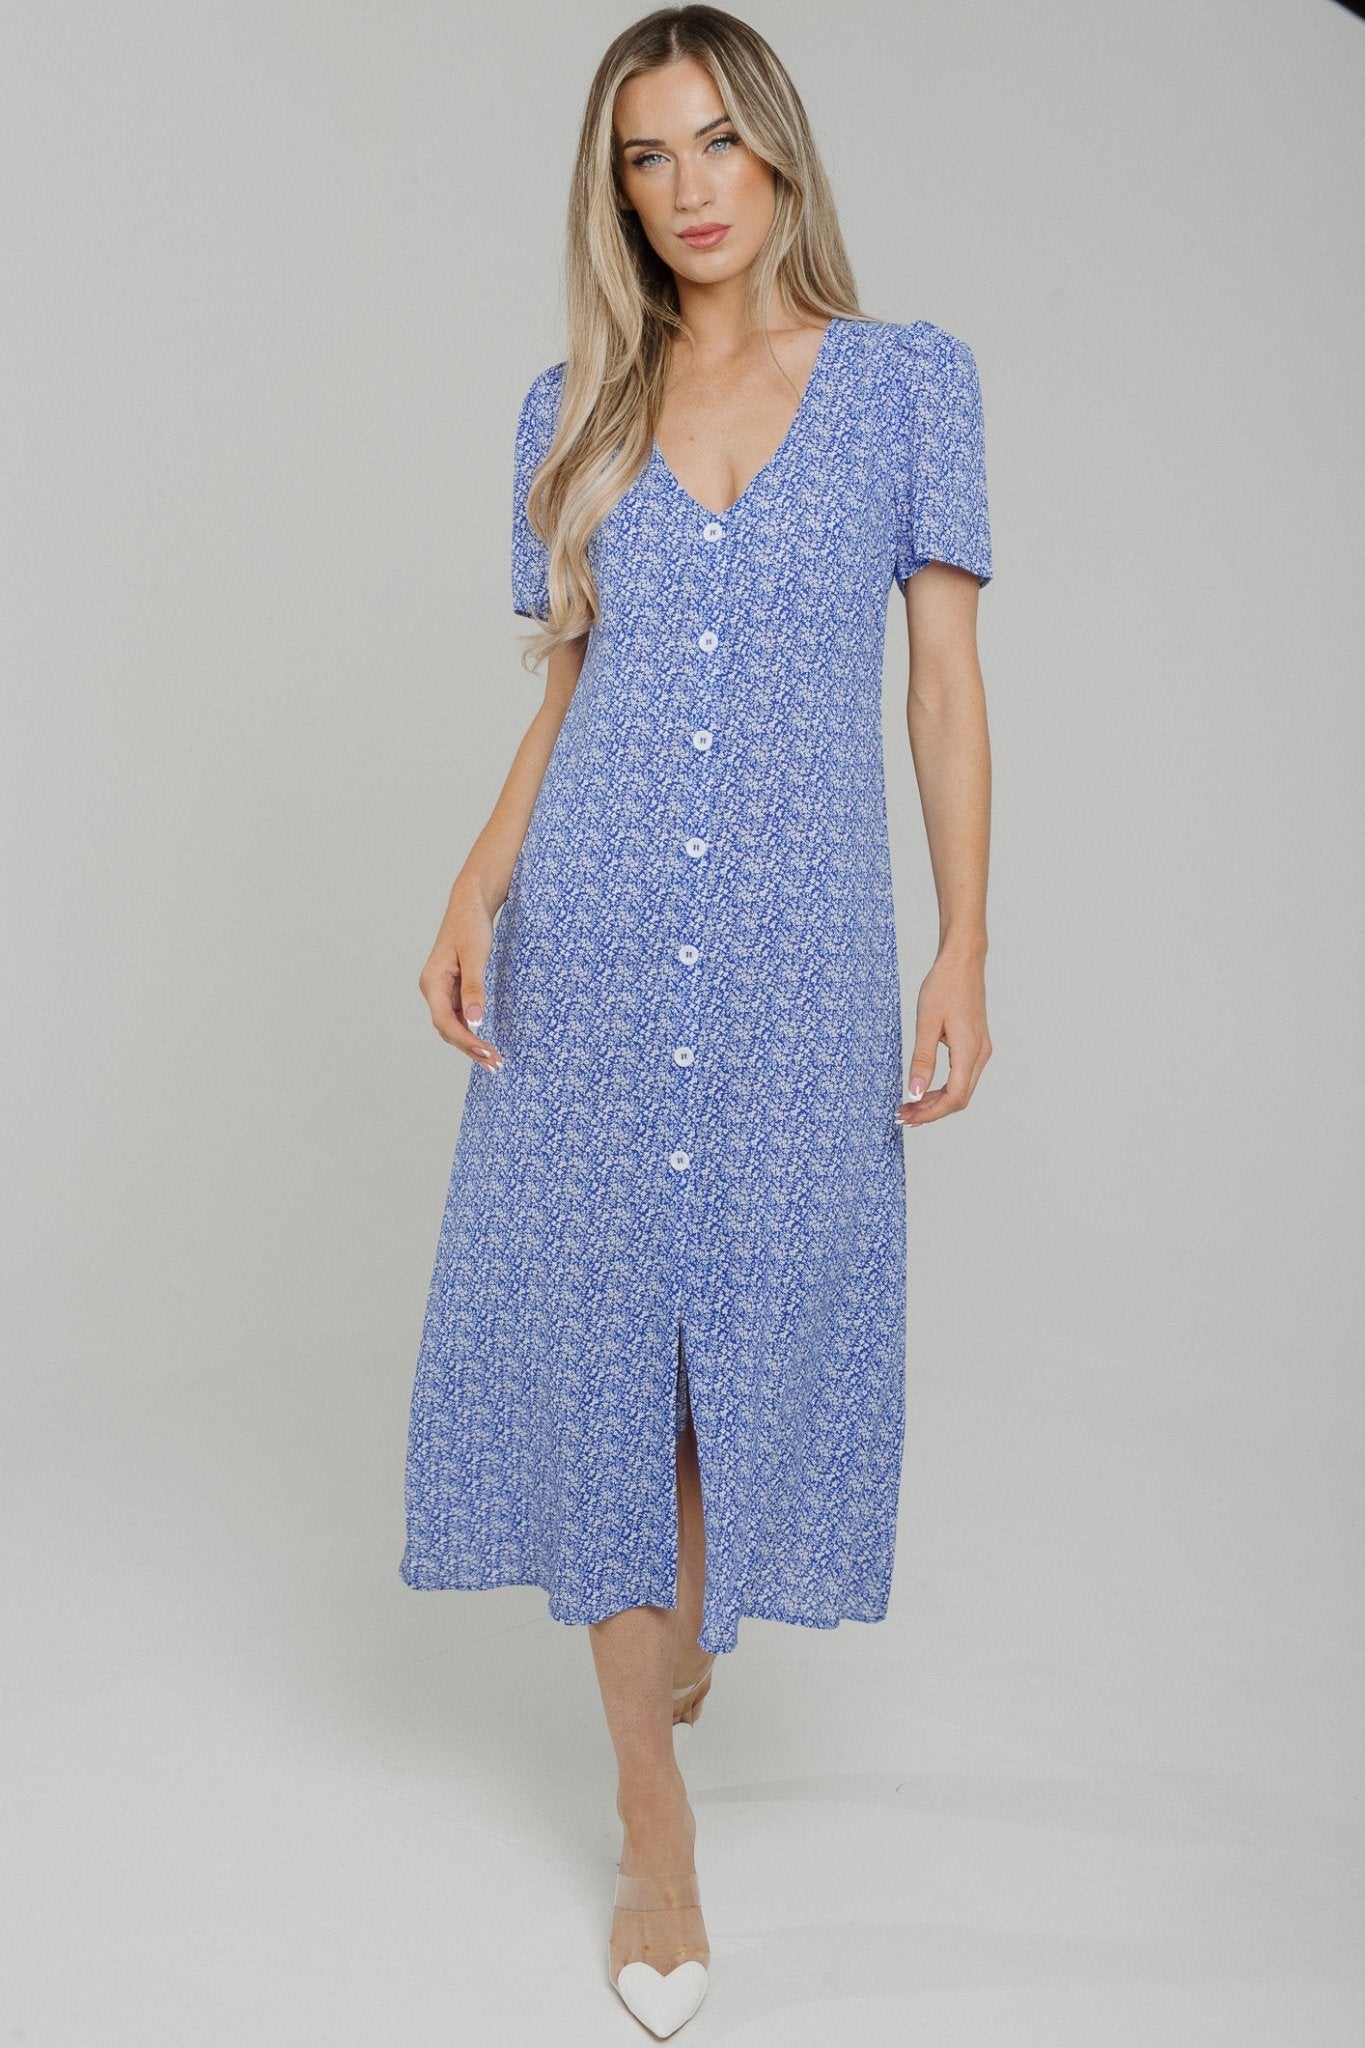 Lucy Button Front Dress In Blue Print - The Walk in Wardrobe